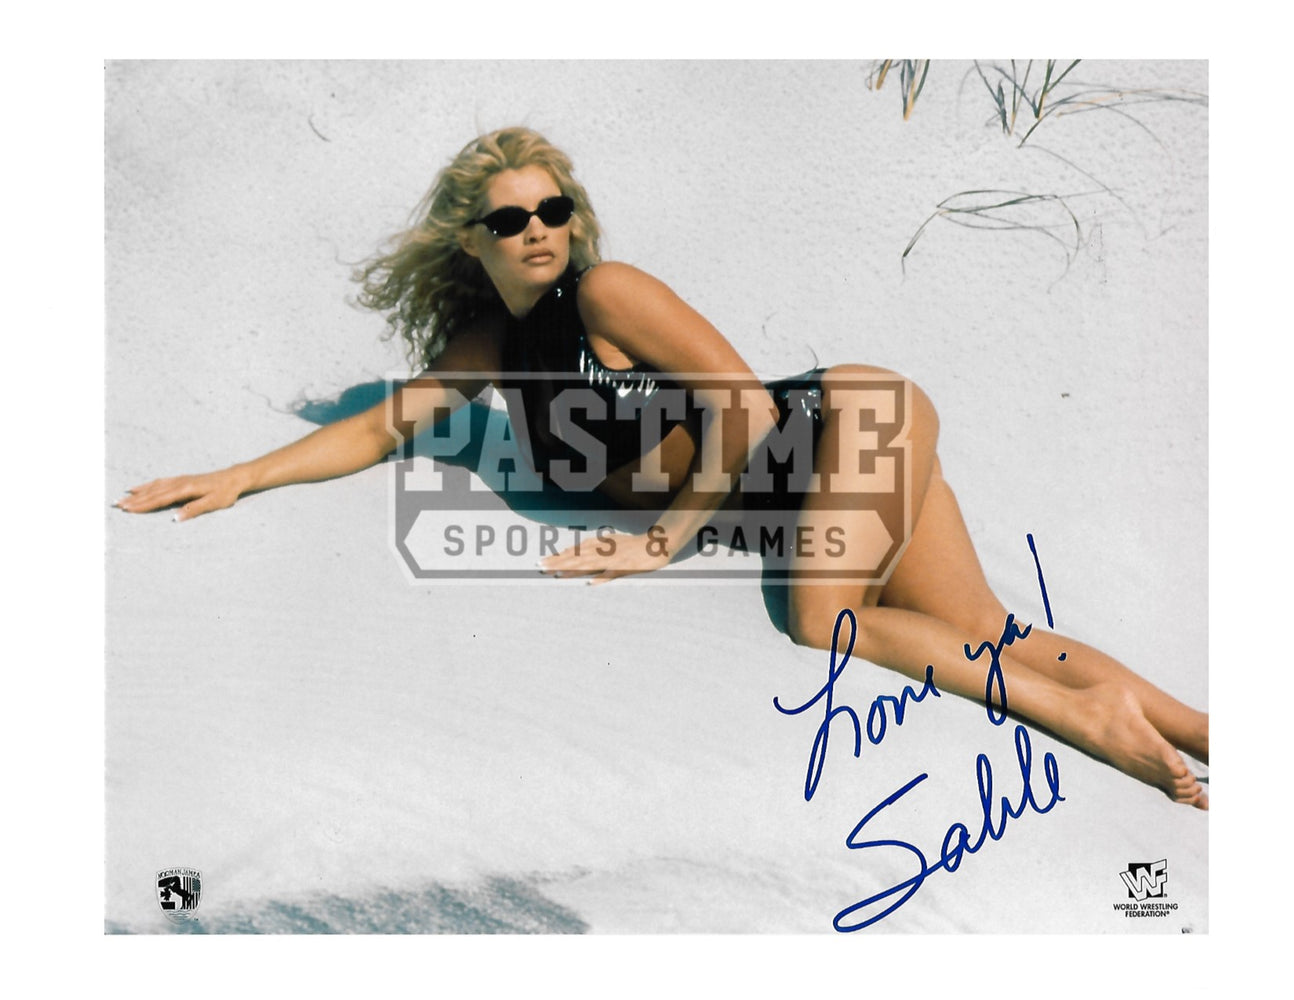 Sable Autographed 8X10 WWF Wrestling (Laying On The Beach) - Pastime Sports & Games